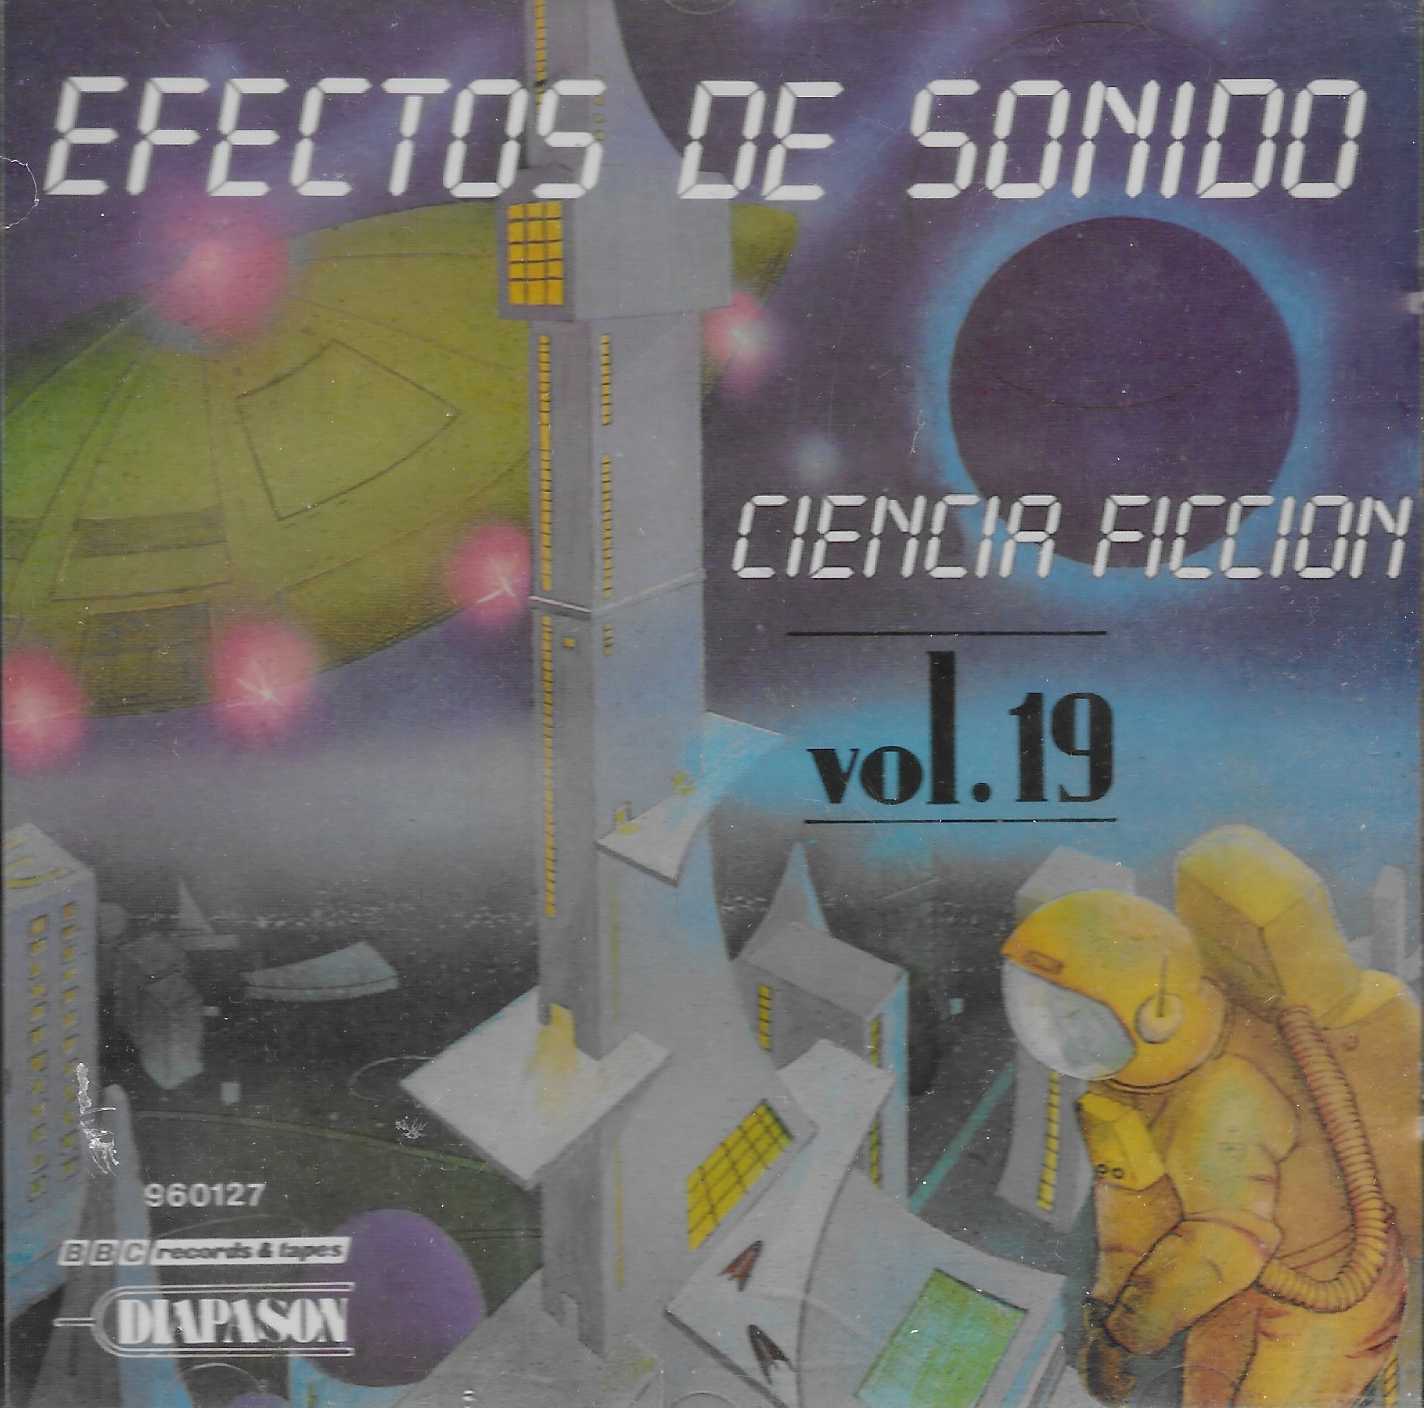 Picture of Effectos de sonido - Volume 19 by artist Various from the BBC cds - Records and Tapes library